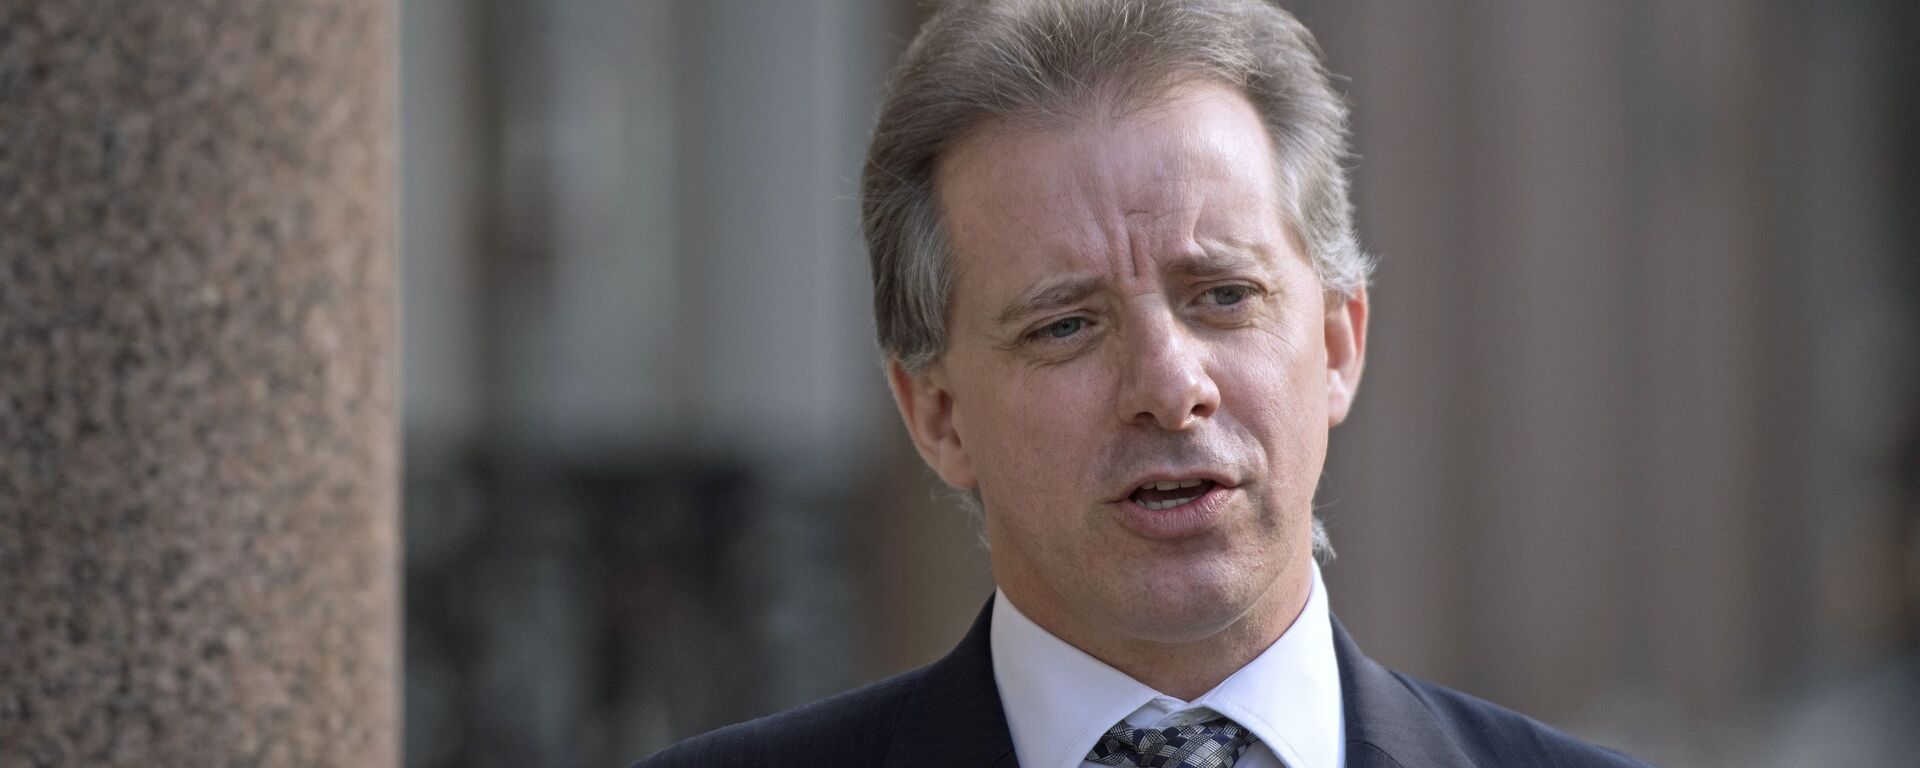 Christopher Steele, former British intelligence officer in London Tuesday March 7, 2017 where he has spoken to the media for the first time . Steele who compiled an explosive and unproven dossier on President Donald Trump’s purported activities in Russia has returned to work - Sputnik International, 1920, 14.09.2022